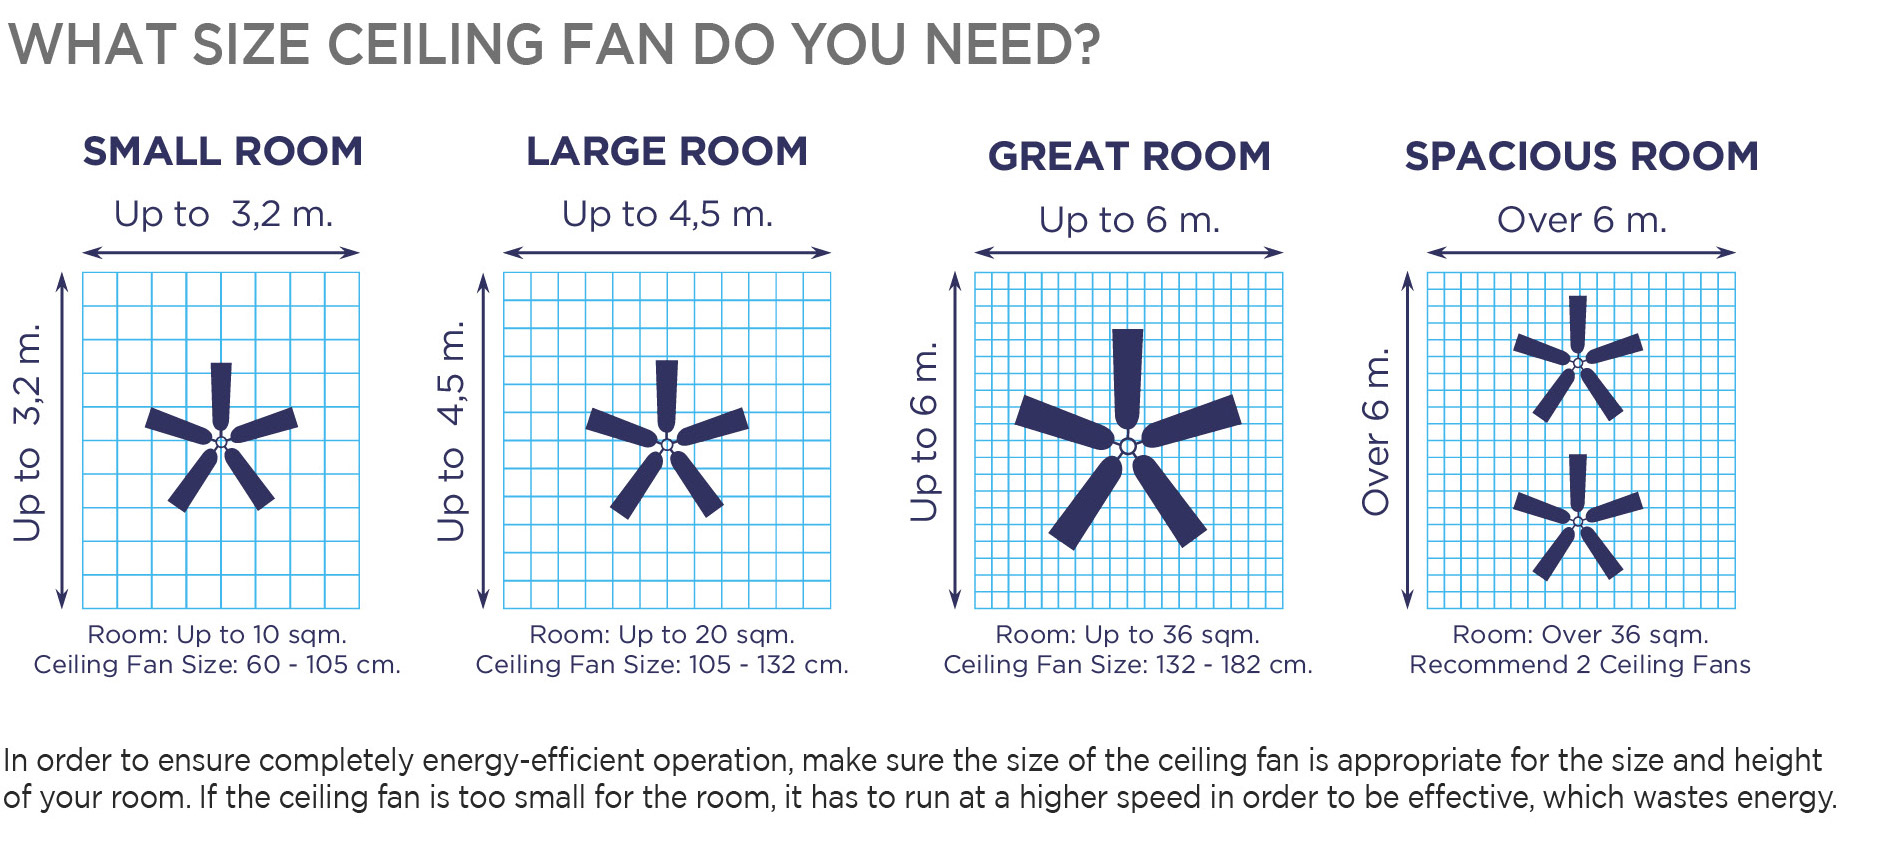 The Best Fan Choice For Your Room